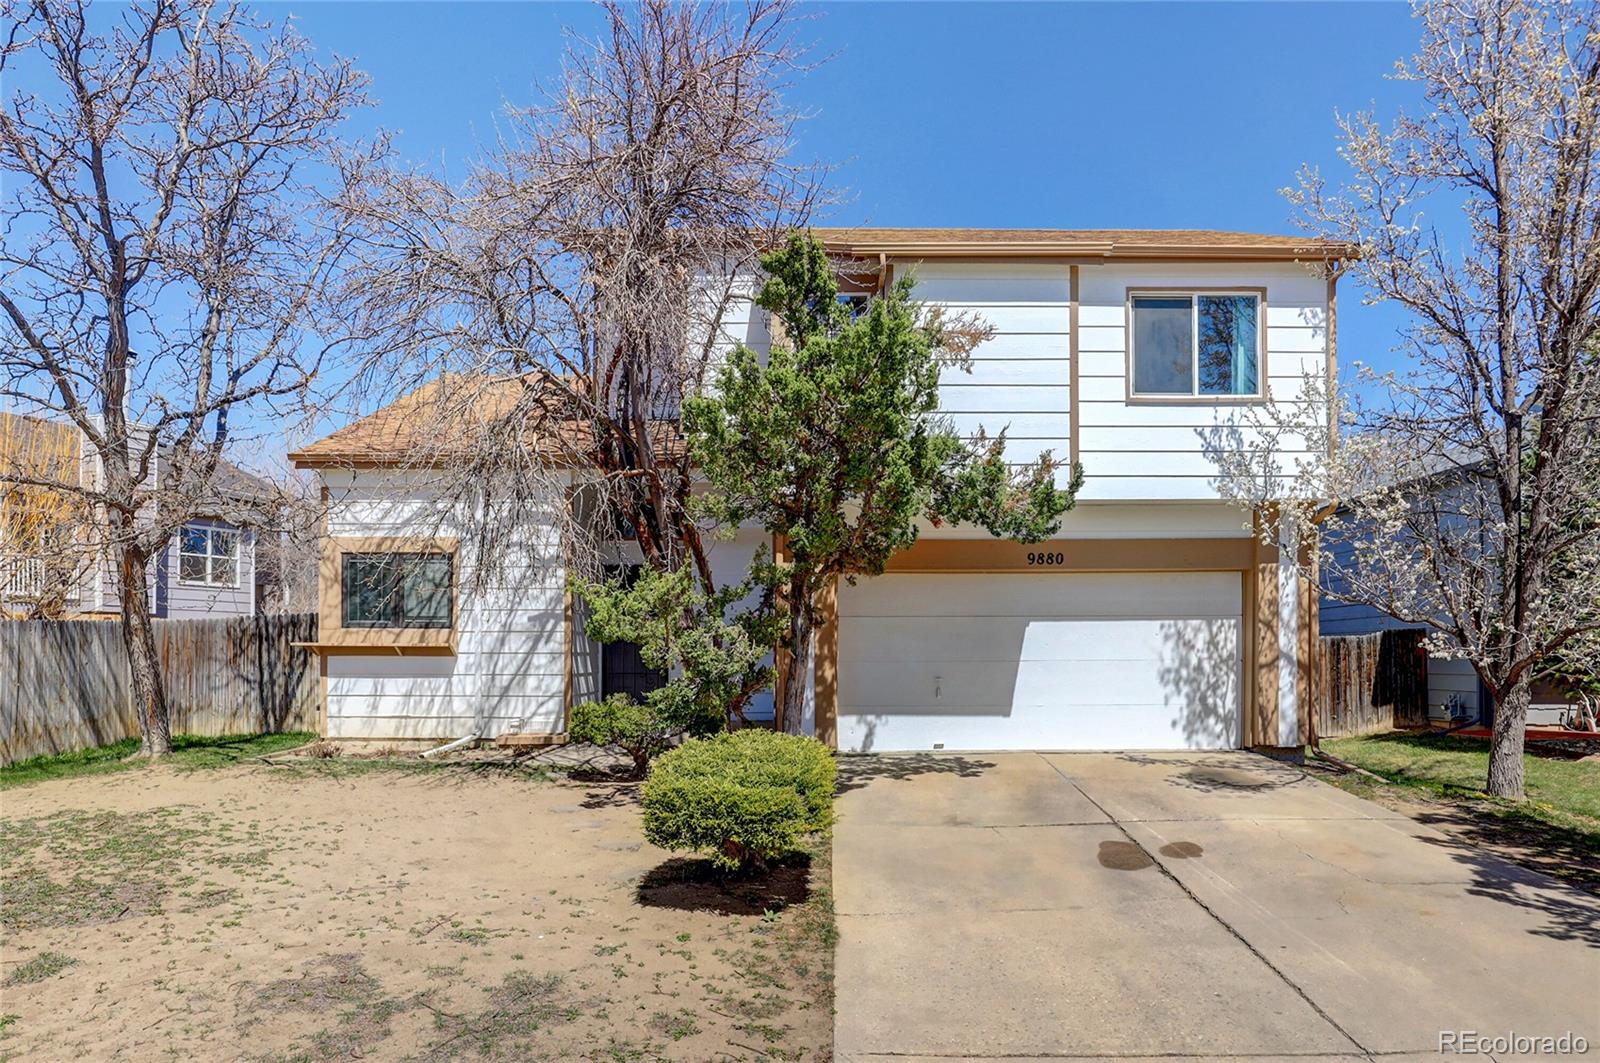 Report Image for 9880  Garland Drive,Broomfield, Colorado